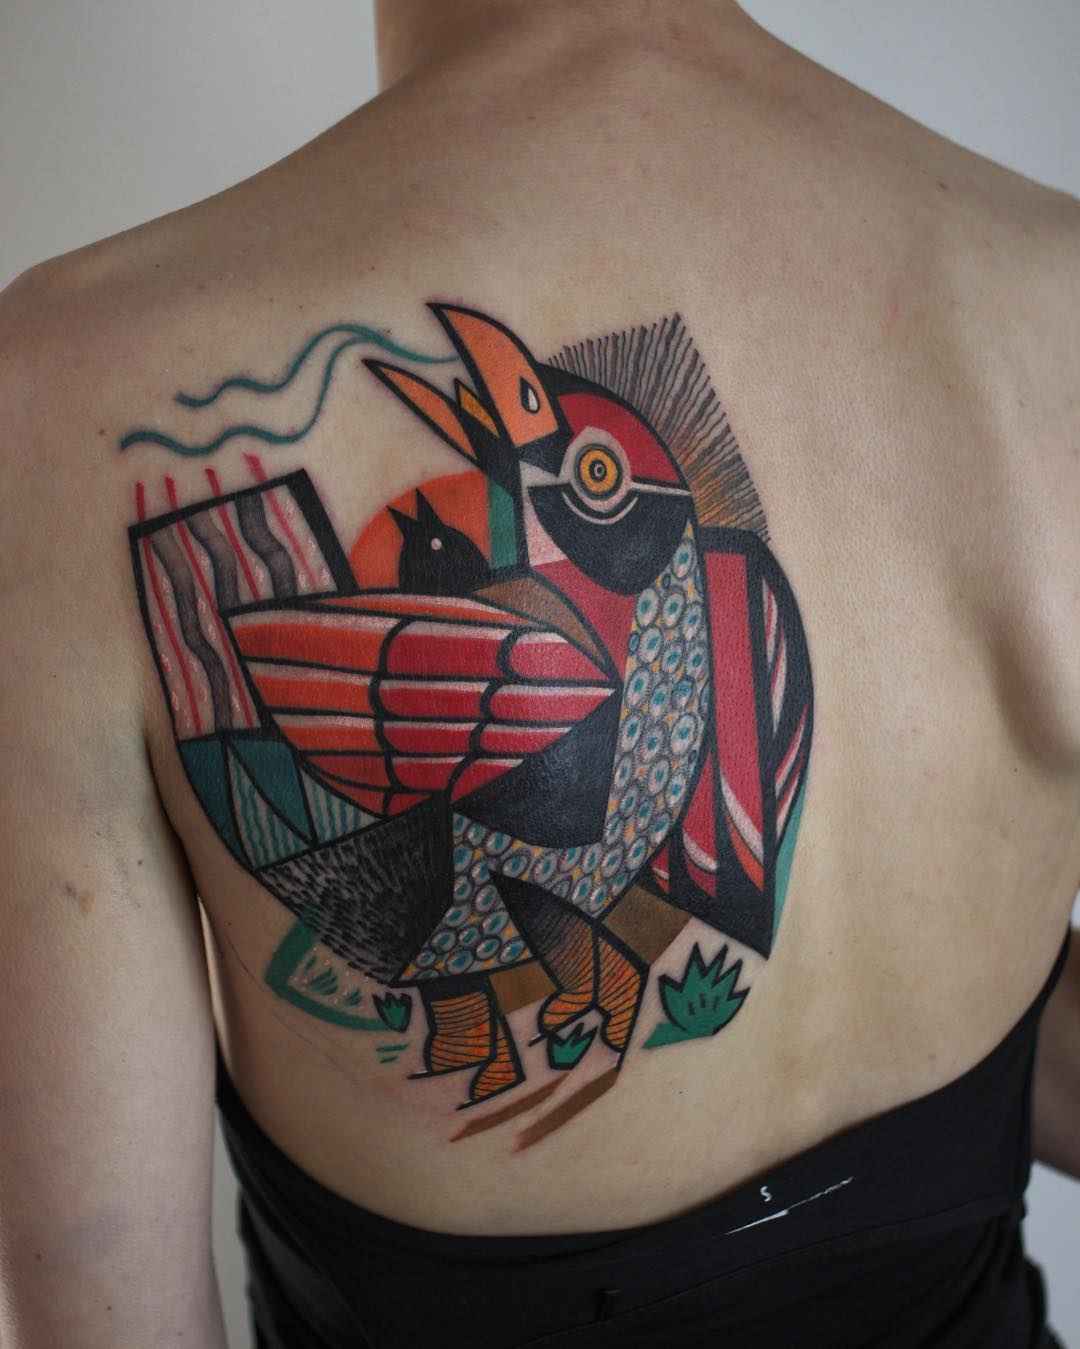 Cubism Revisited | shaneacuff.com - Want a tattoo? Reserve y… | Flickr